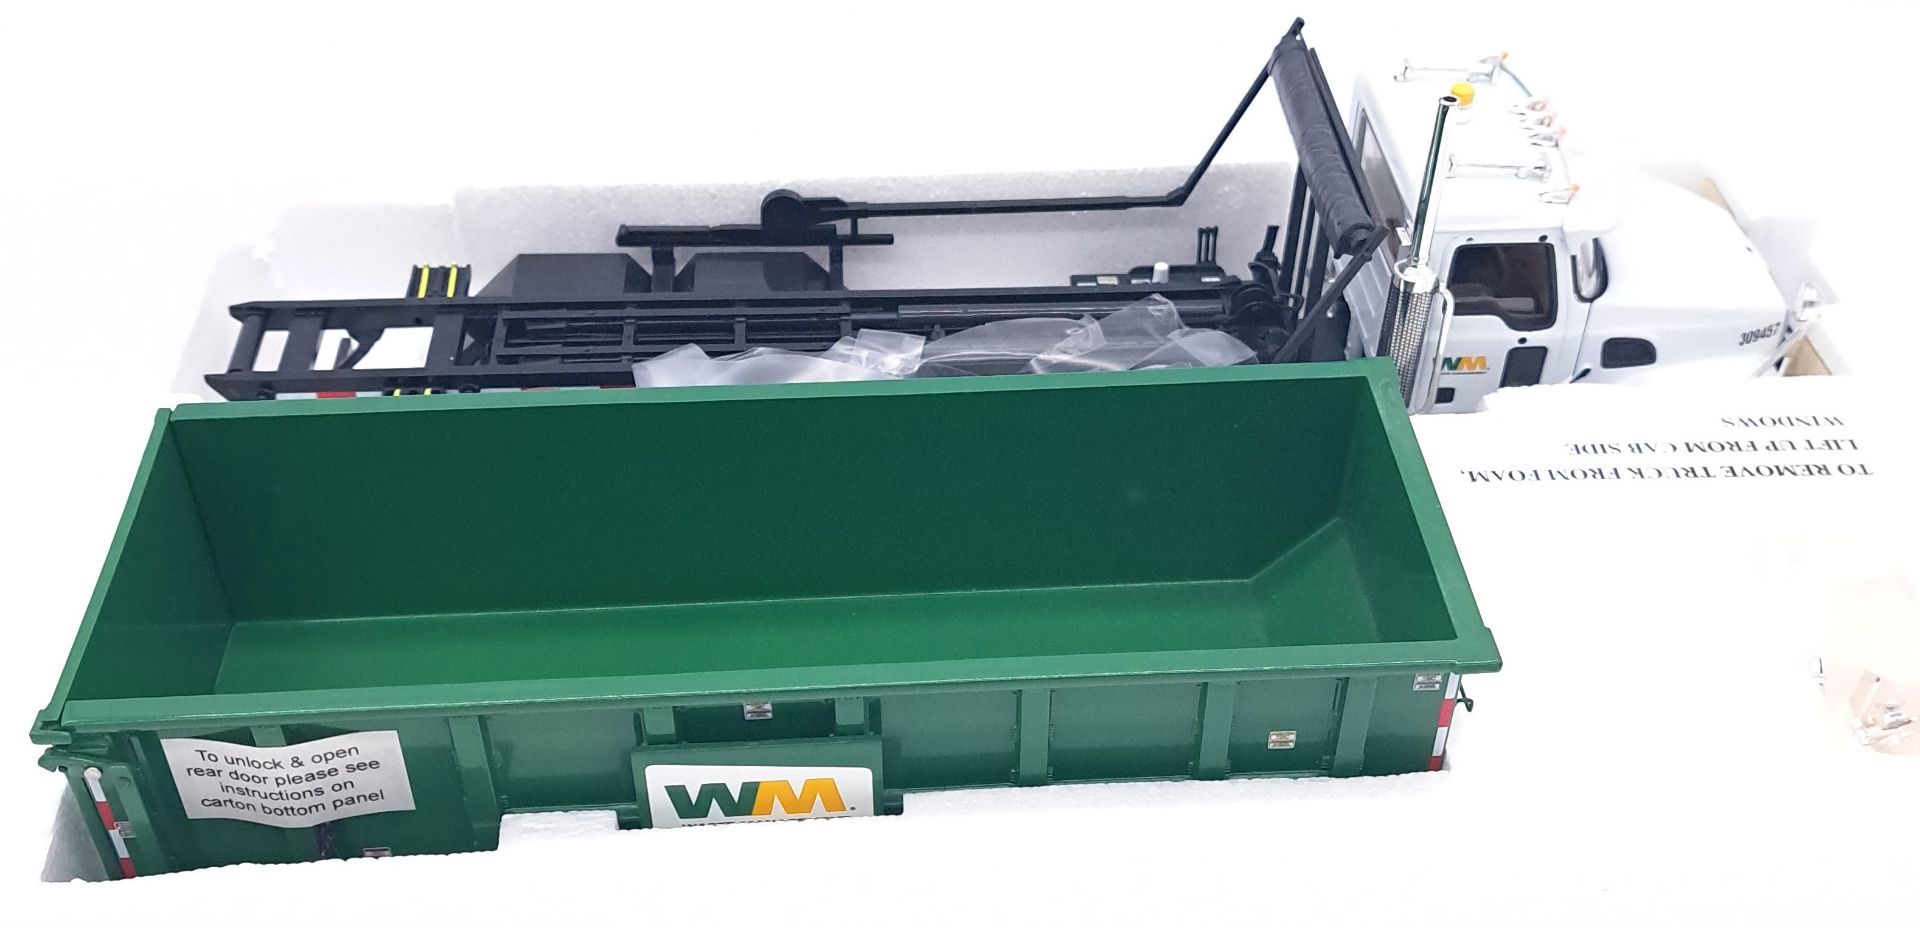 First Gear, a boxed 1:34 scale Roll-Off Refuse Truck "WM Waste Management" - Image 4 of 5